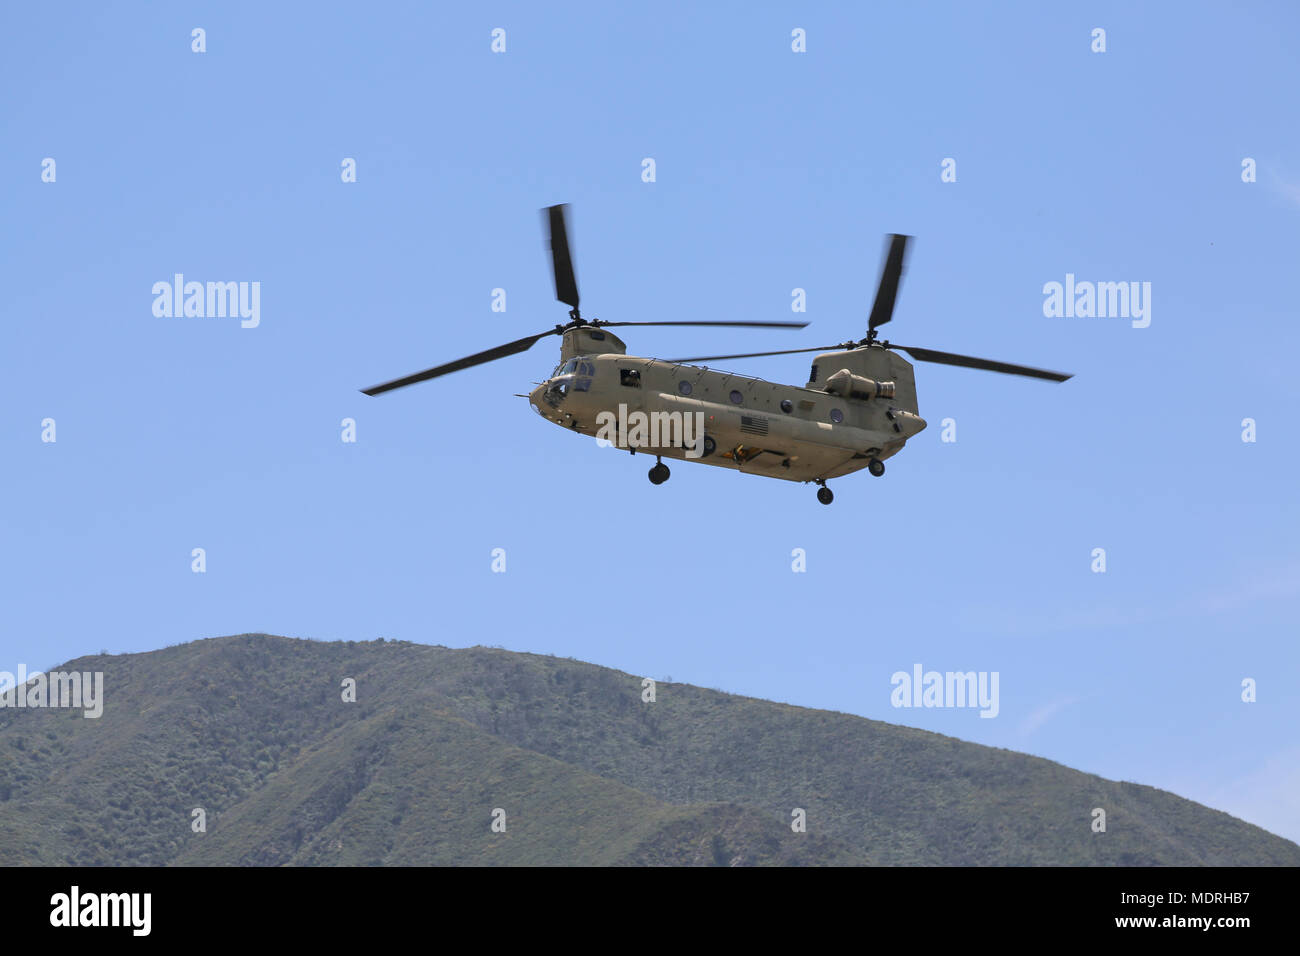 U.S. Army Chinook prepares to land at Big Tujunga Dam Ca., Apr. 18, 2018. The Prominent Hunt 18-1 exercise brings in federal, state, and local agencies to confirm the oncoming 20th CBRNE Ground Collection Team as well as enable other Task Force members to conduct collective and individual training as part of the National Technical Nuclear Forensics (NTNF) Ground Collection Task Force (GCTF). (U.S. Army photo by Pfc. Julie Driver) Stock Photo